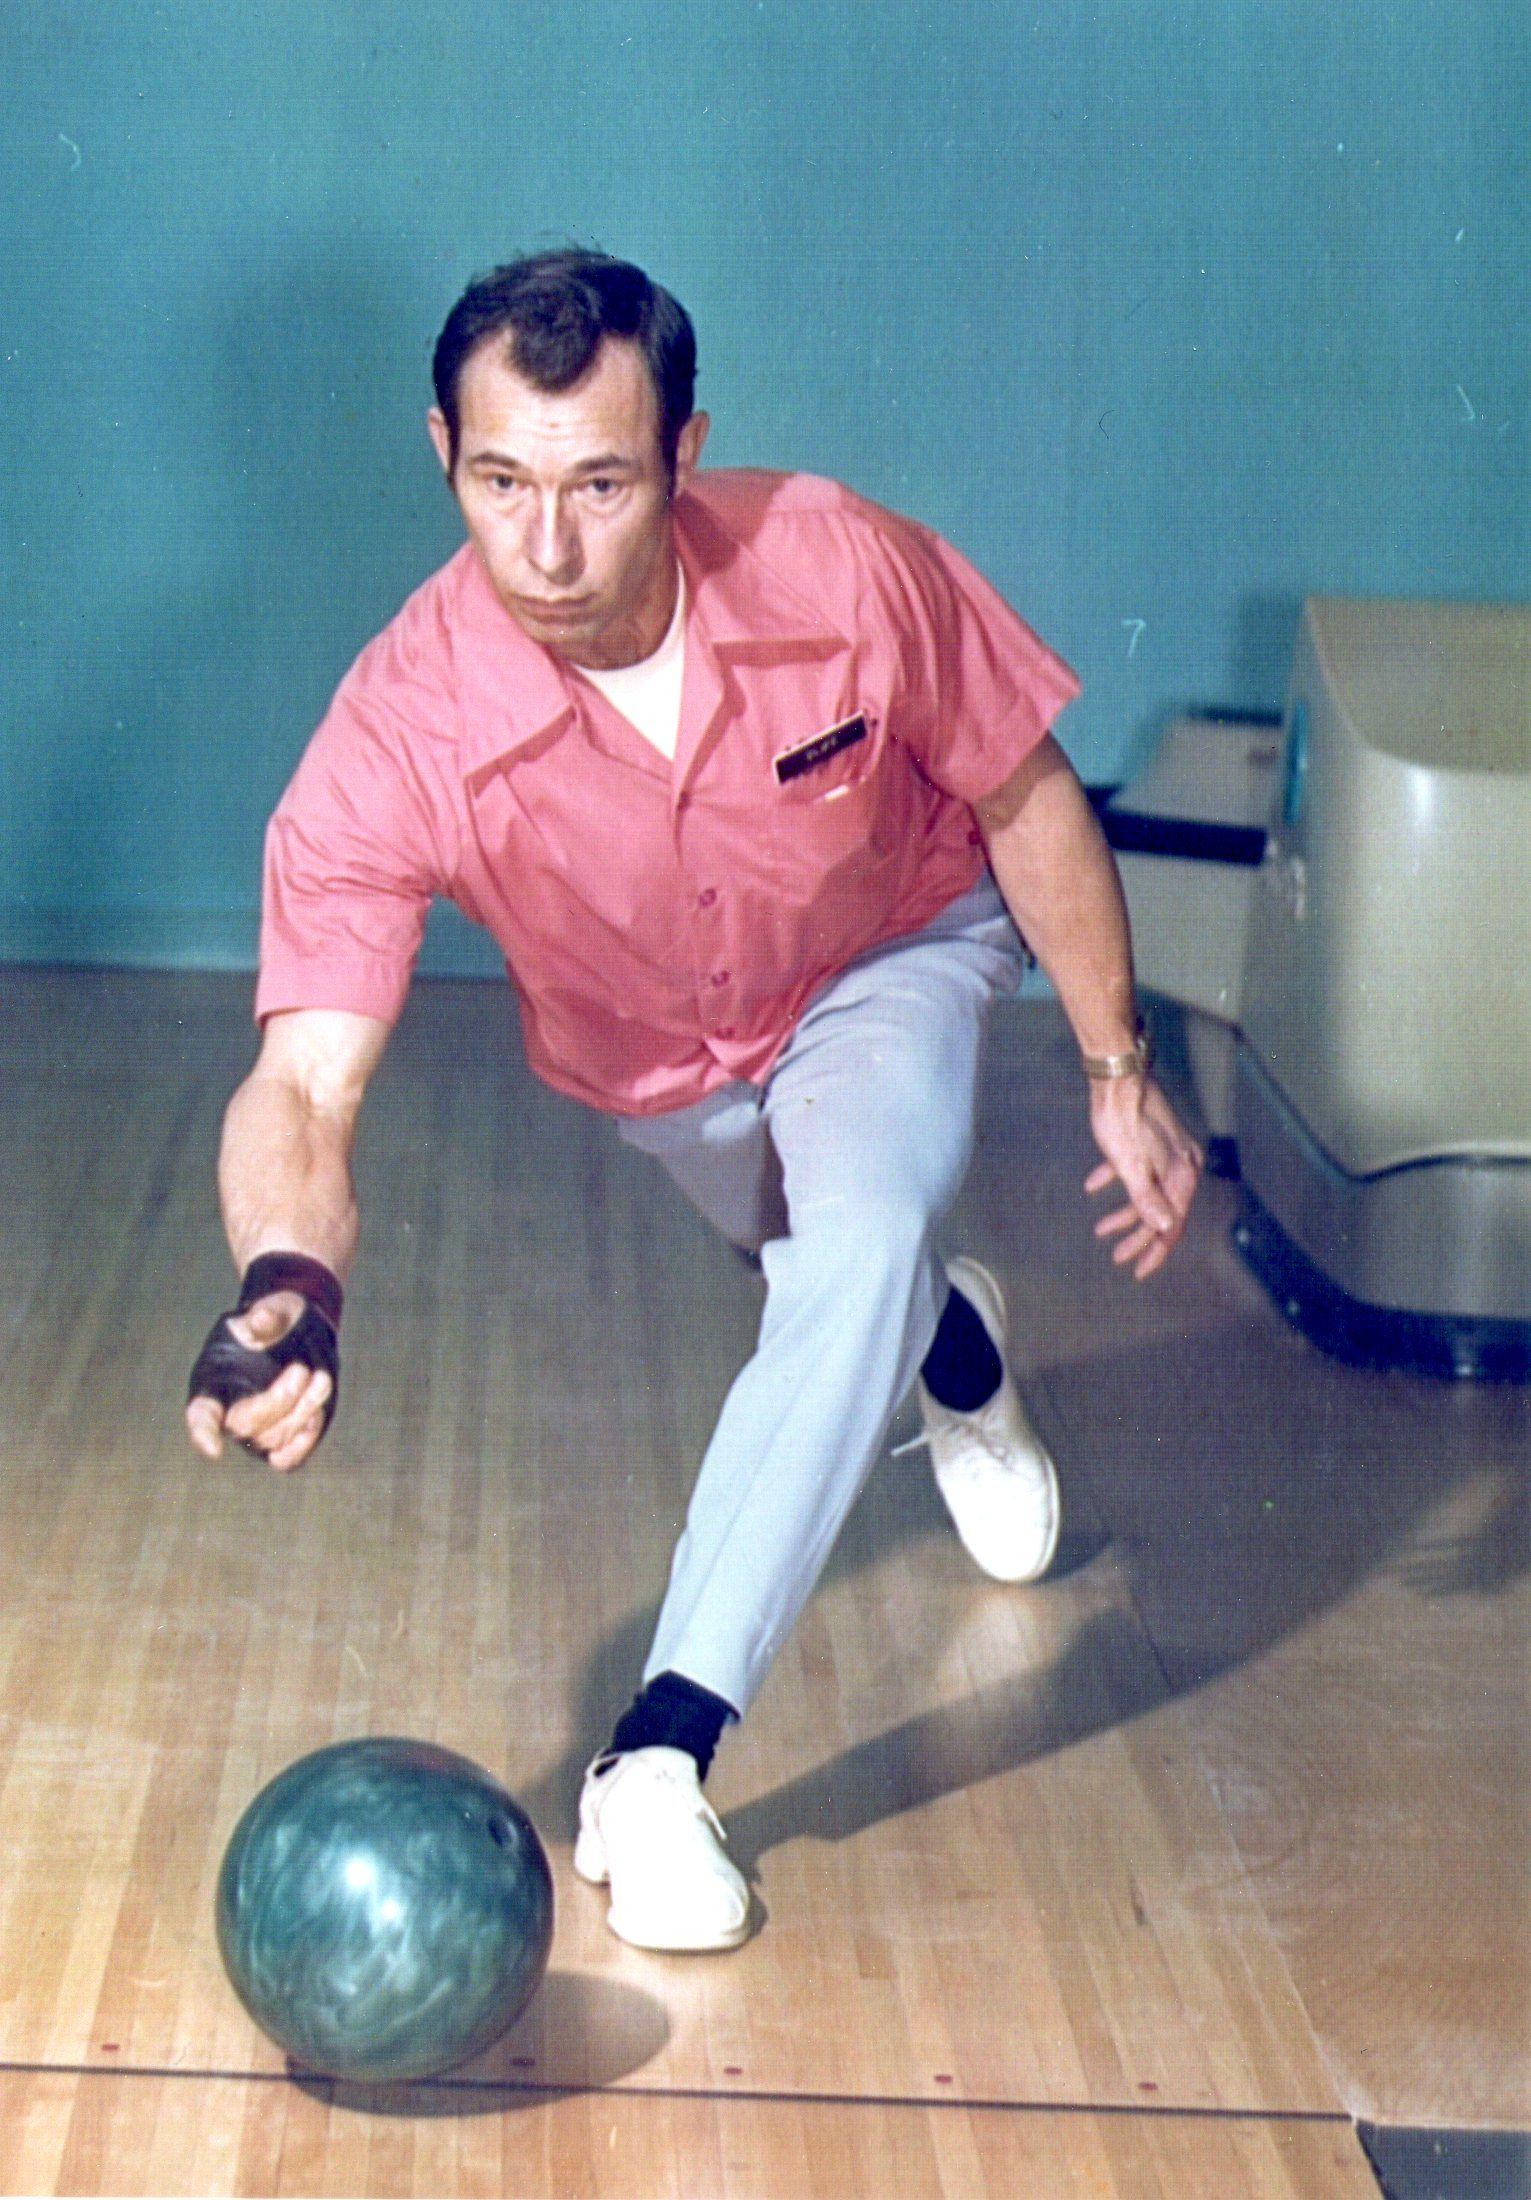 amateur bowling hall of fame